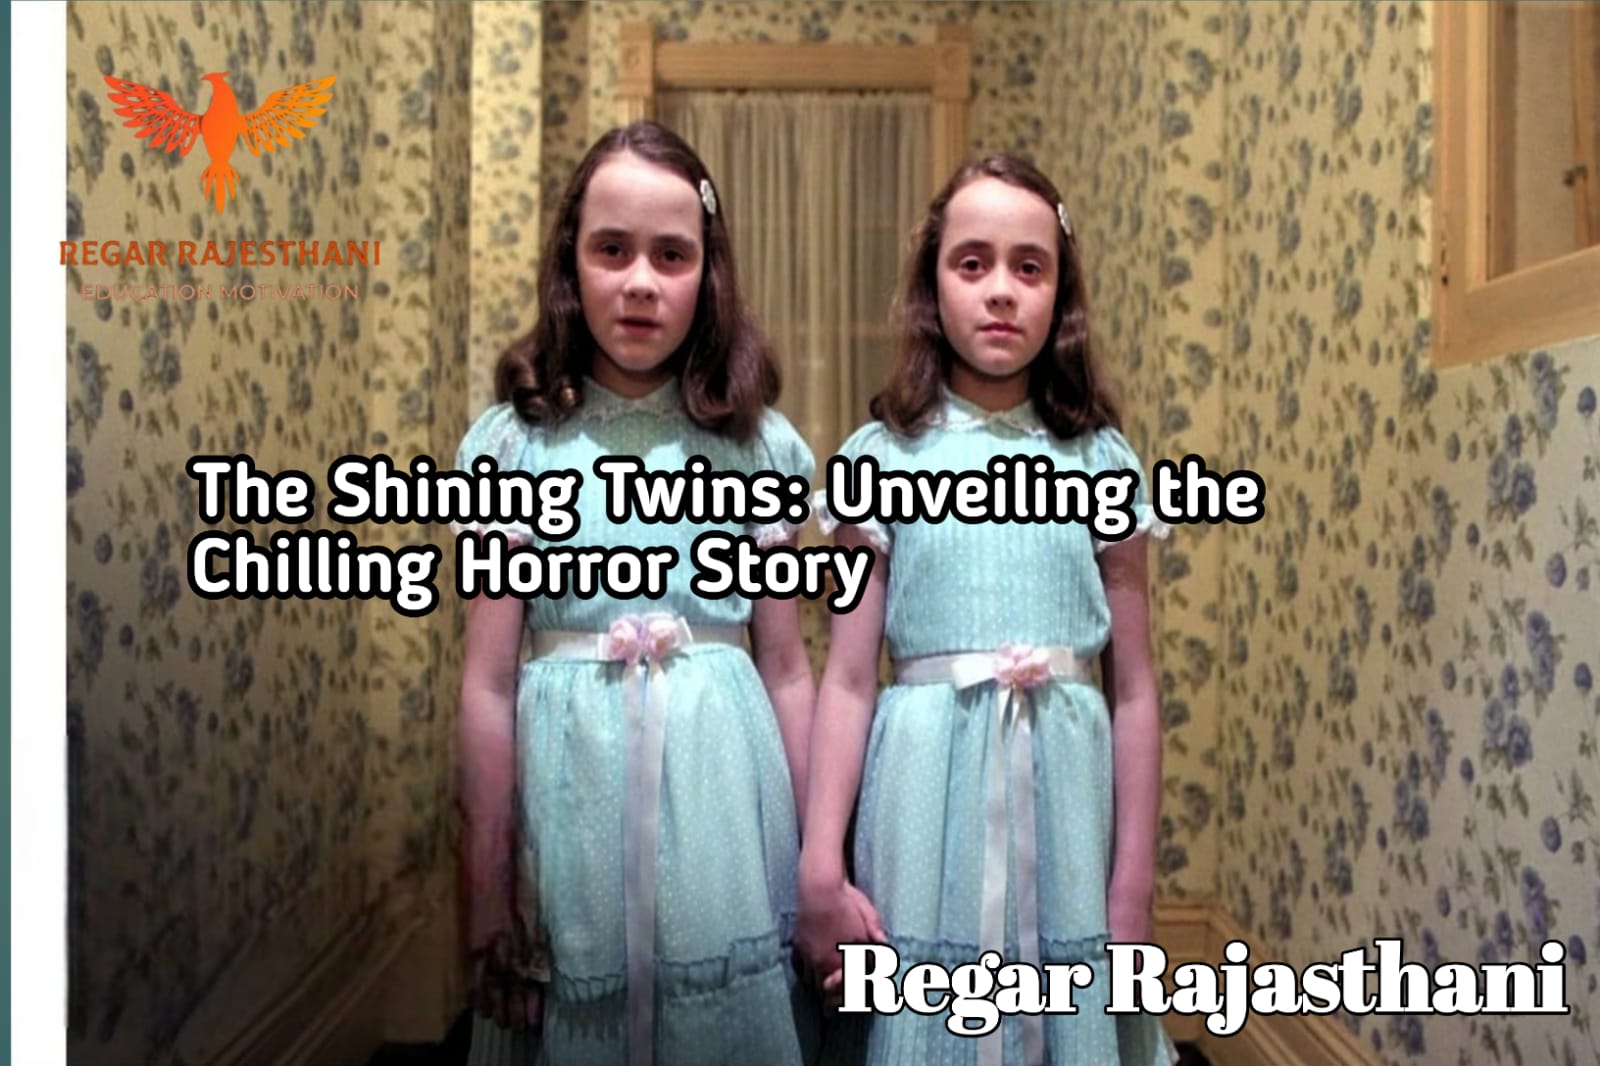 "The Shining Twins: A Haunting Horror Story"